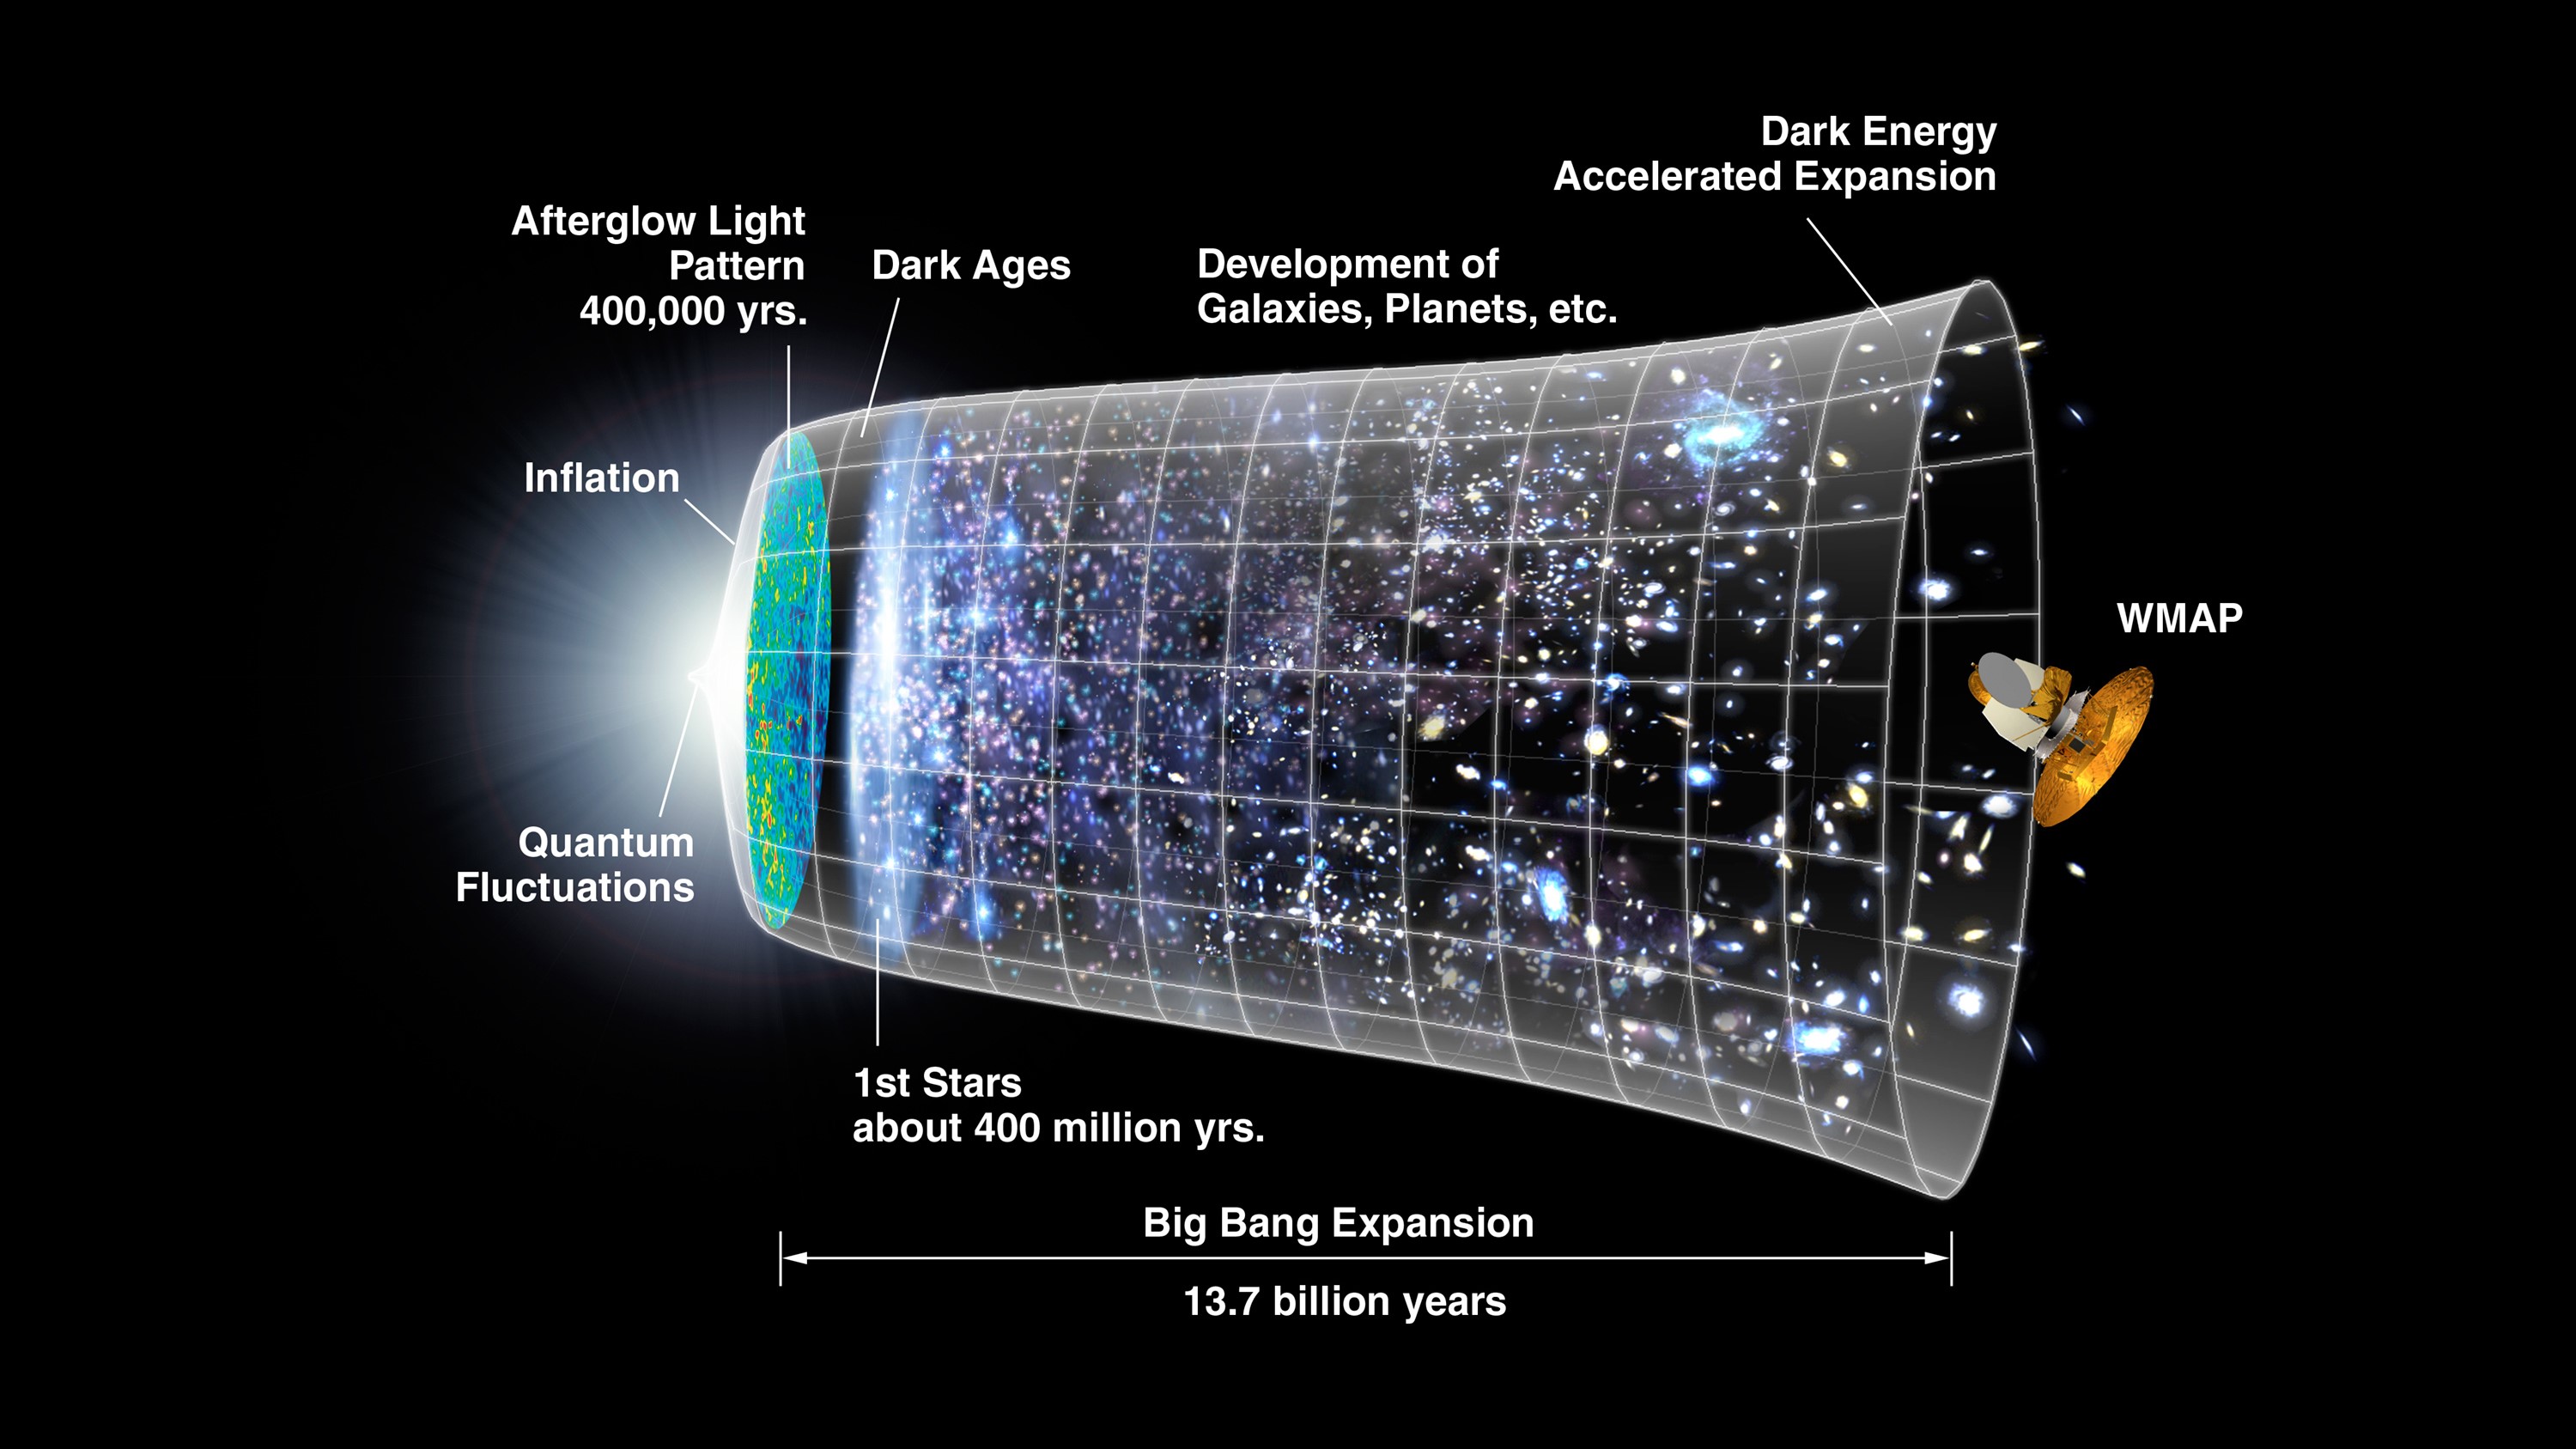 This graphic shows a timeline of the universe based on the Big Bang theory and the inflation model.